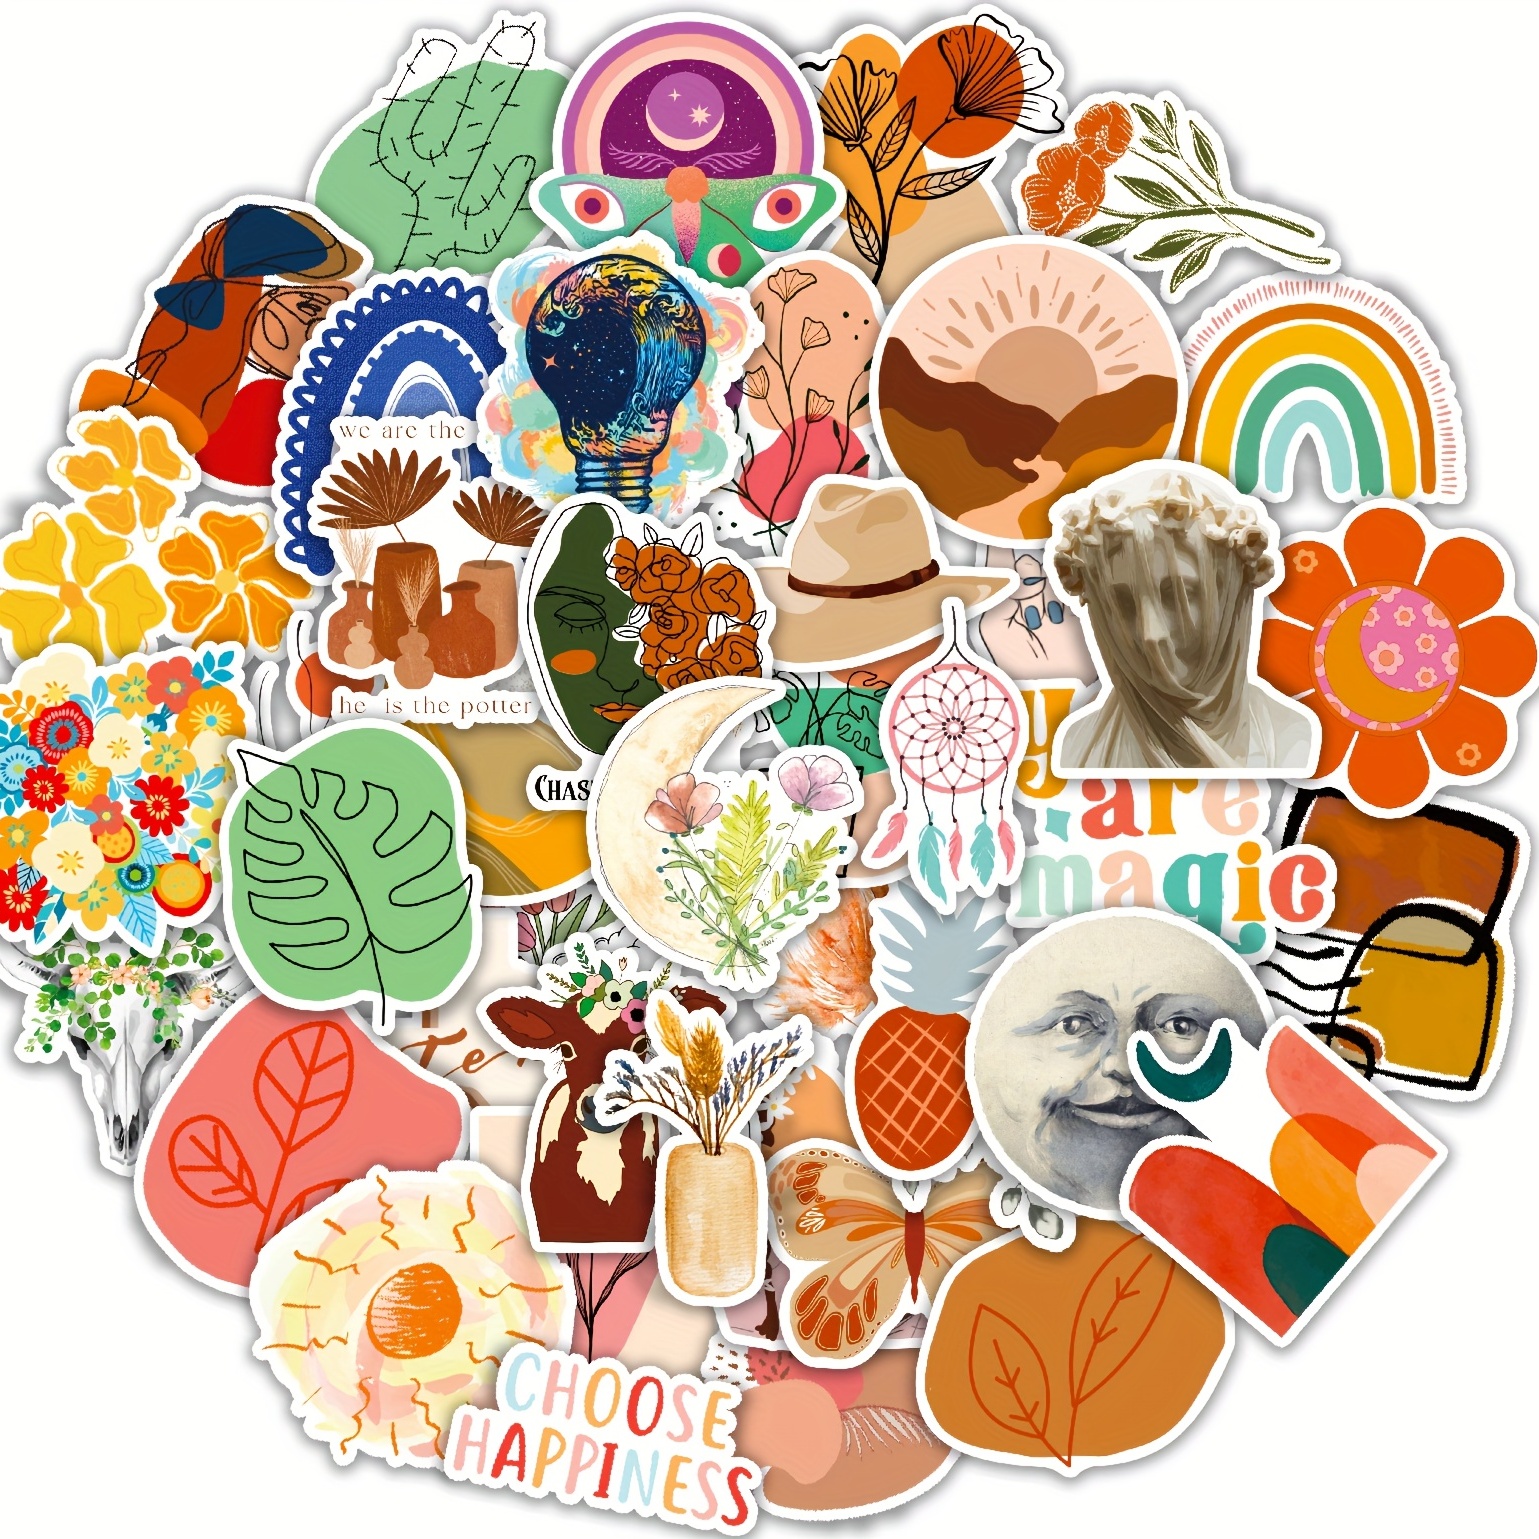 50pcs Aesthetics Stickers For Water Bottles, Creative Bottle World Vinyl Waterproof  Stickers For Girls Teens Adults, Art Stickers Pack For Scrapbook Journal  Laptop Phone Case Luggage